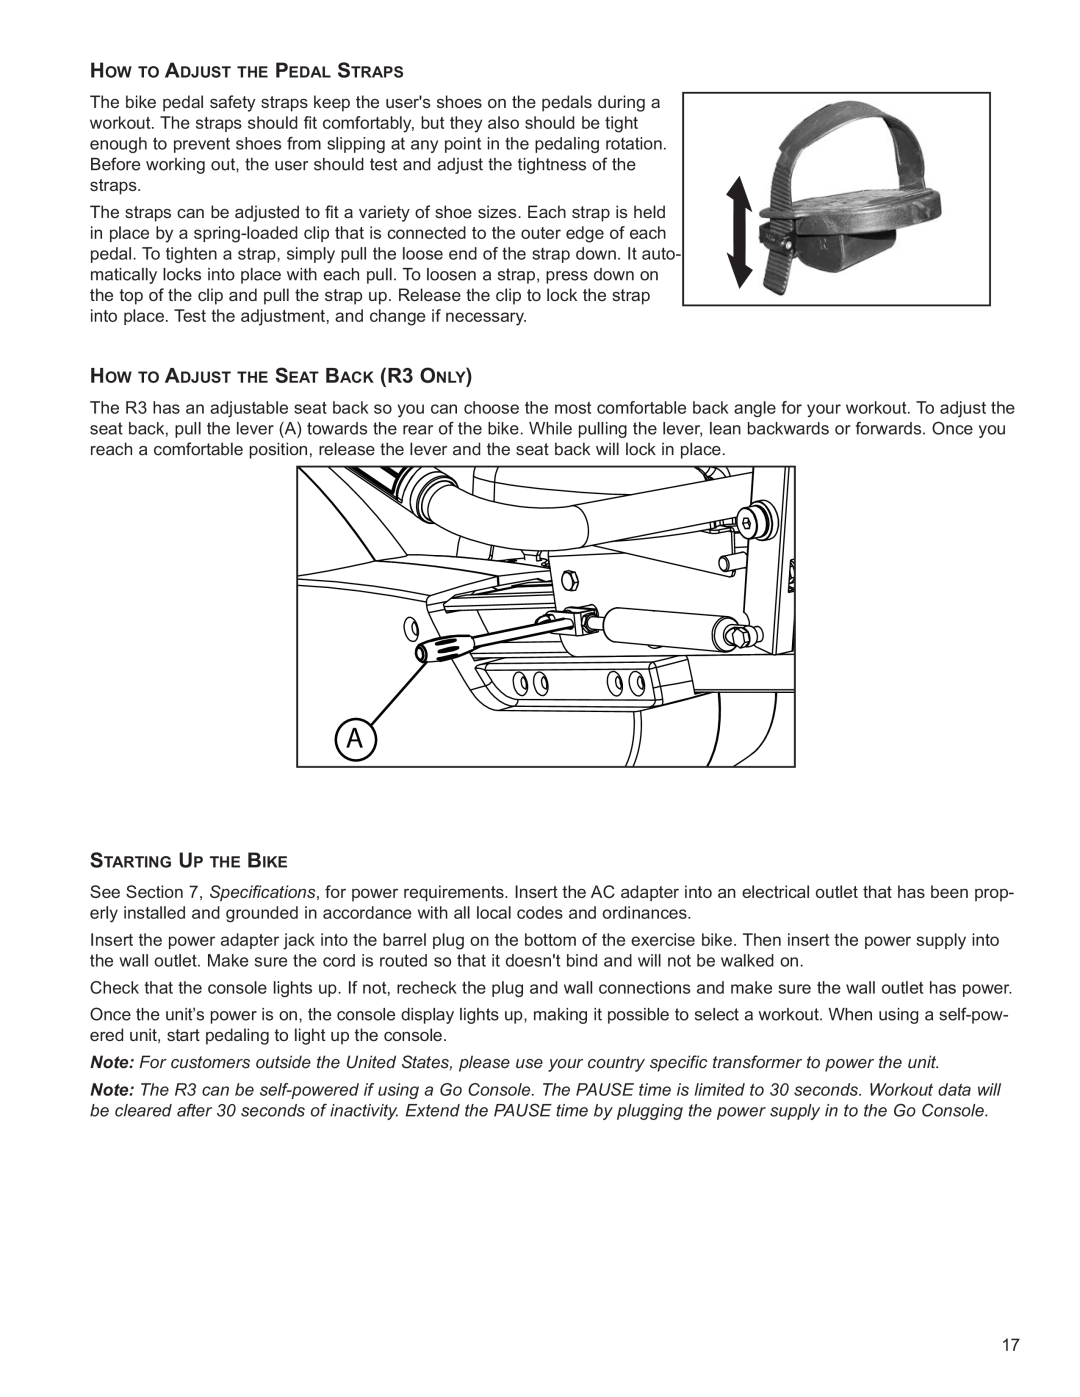 Life Fitness owner manual How To Adjust The Pedal Straps, HOW TO ADJUST THE SEAT BACK R3 ONLY, Starting Up The Bike 